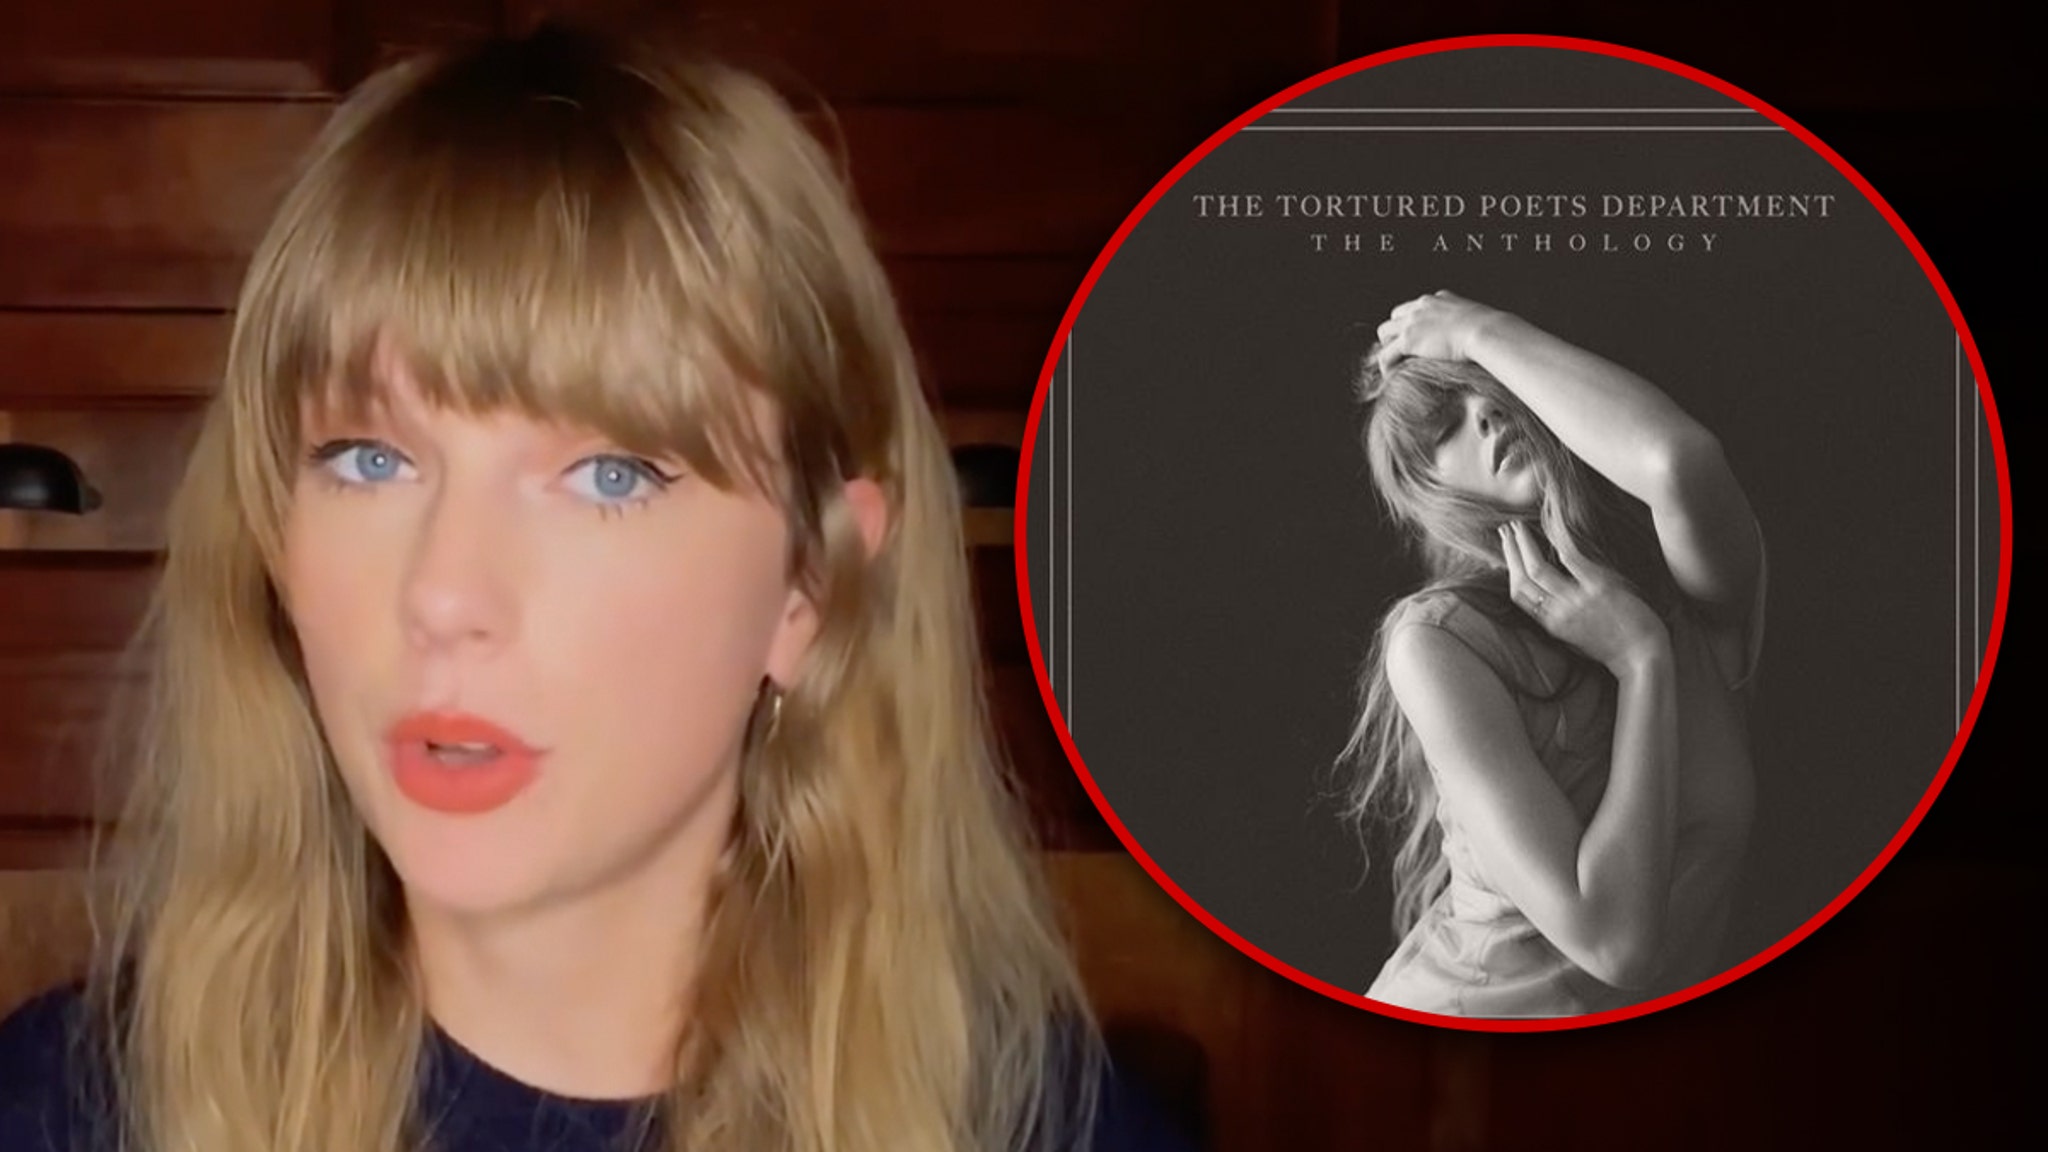 Taylor Swift reviewer's name left out for security reasons